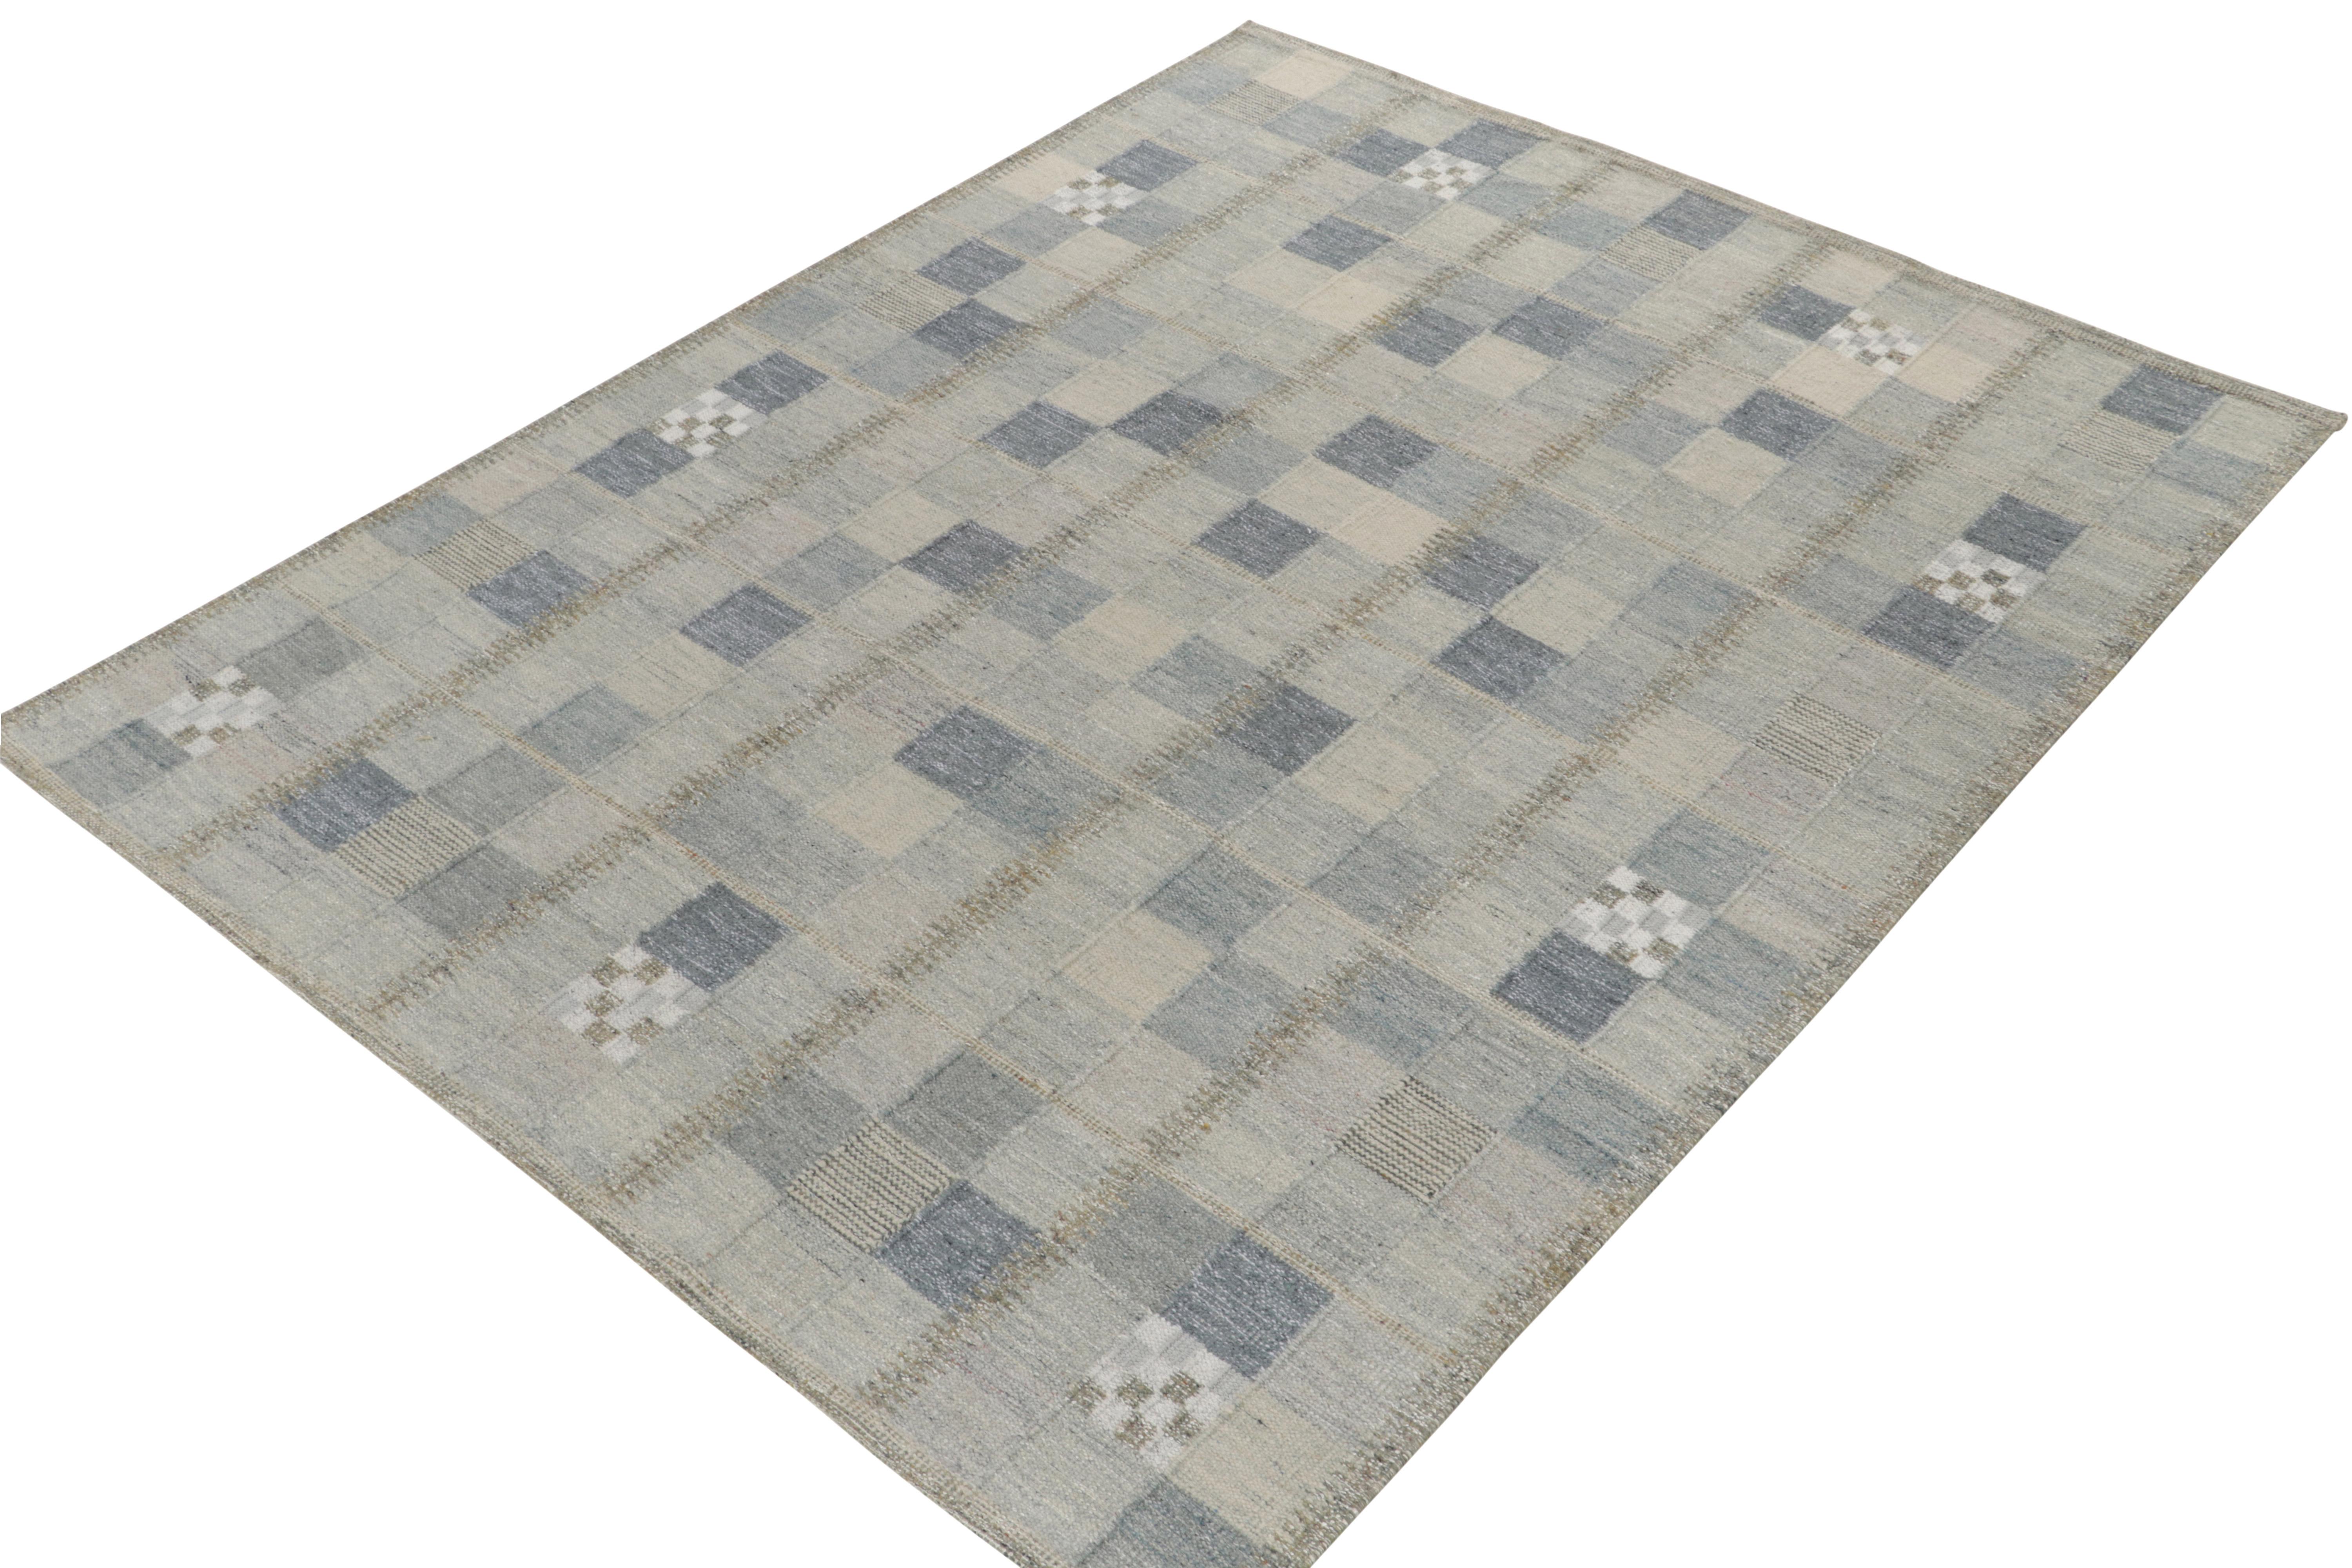 Exemplifying a modern take on Swedish styles, a 6x9 flat weave from Rug & Kilim’s award-winning Scandinavian Kilim collection. The handwoven rug enjoys a smart application of geometry with well defined compartmentalisation entwining variegated tones